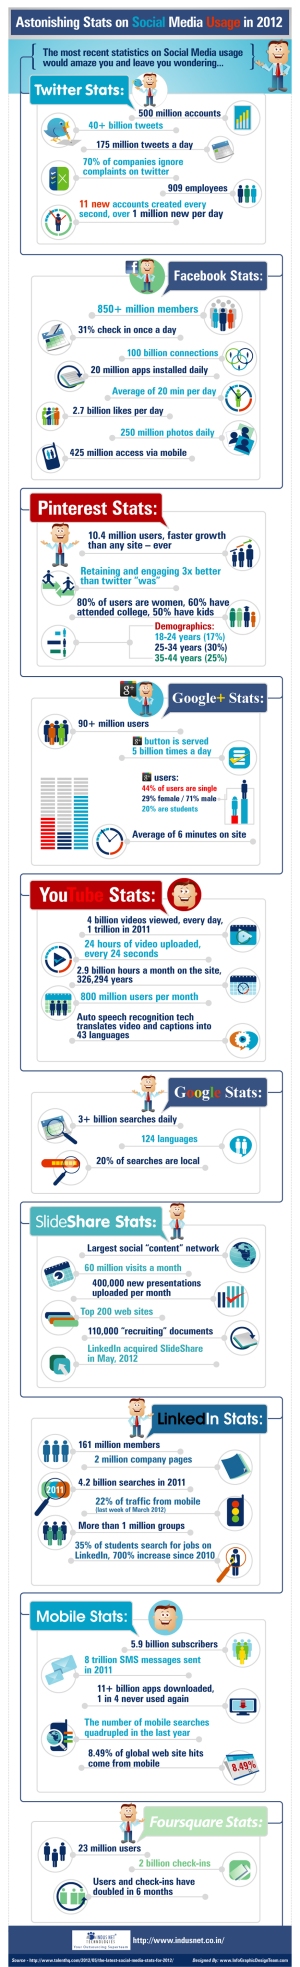 infographic-astonishing-stats-on-social-media-usage-in-2012